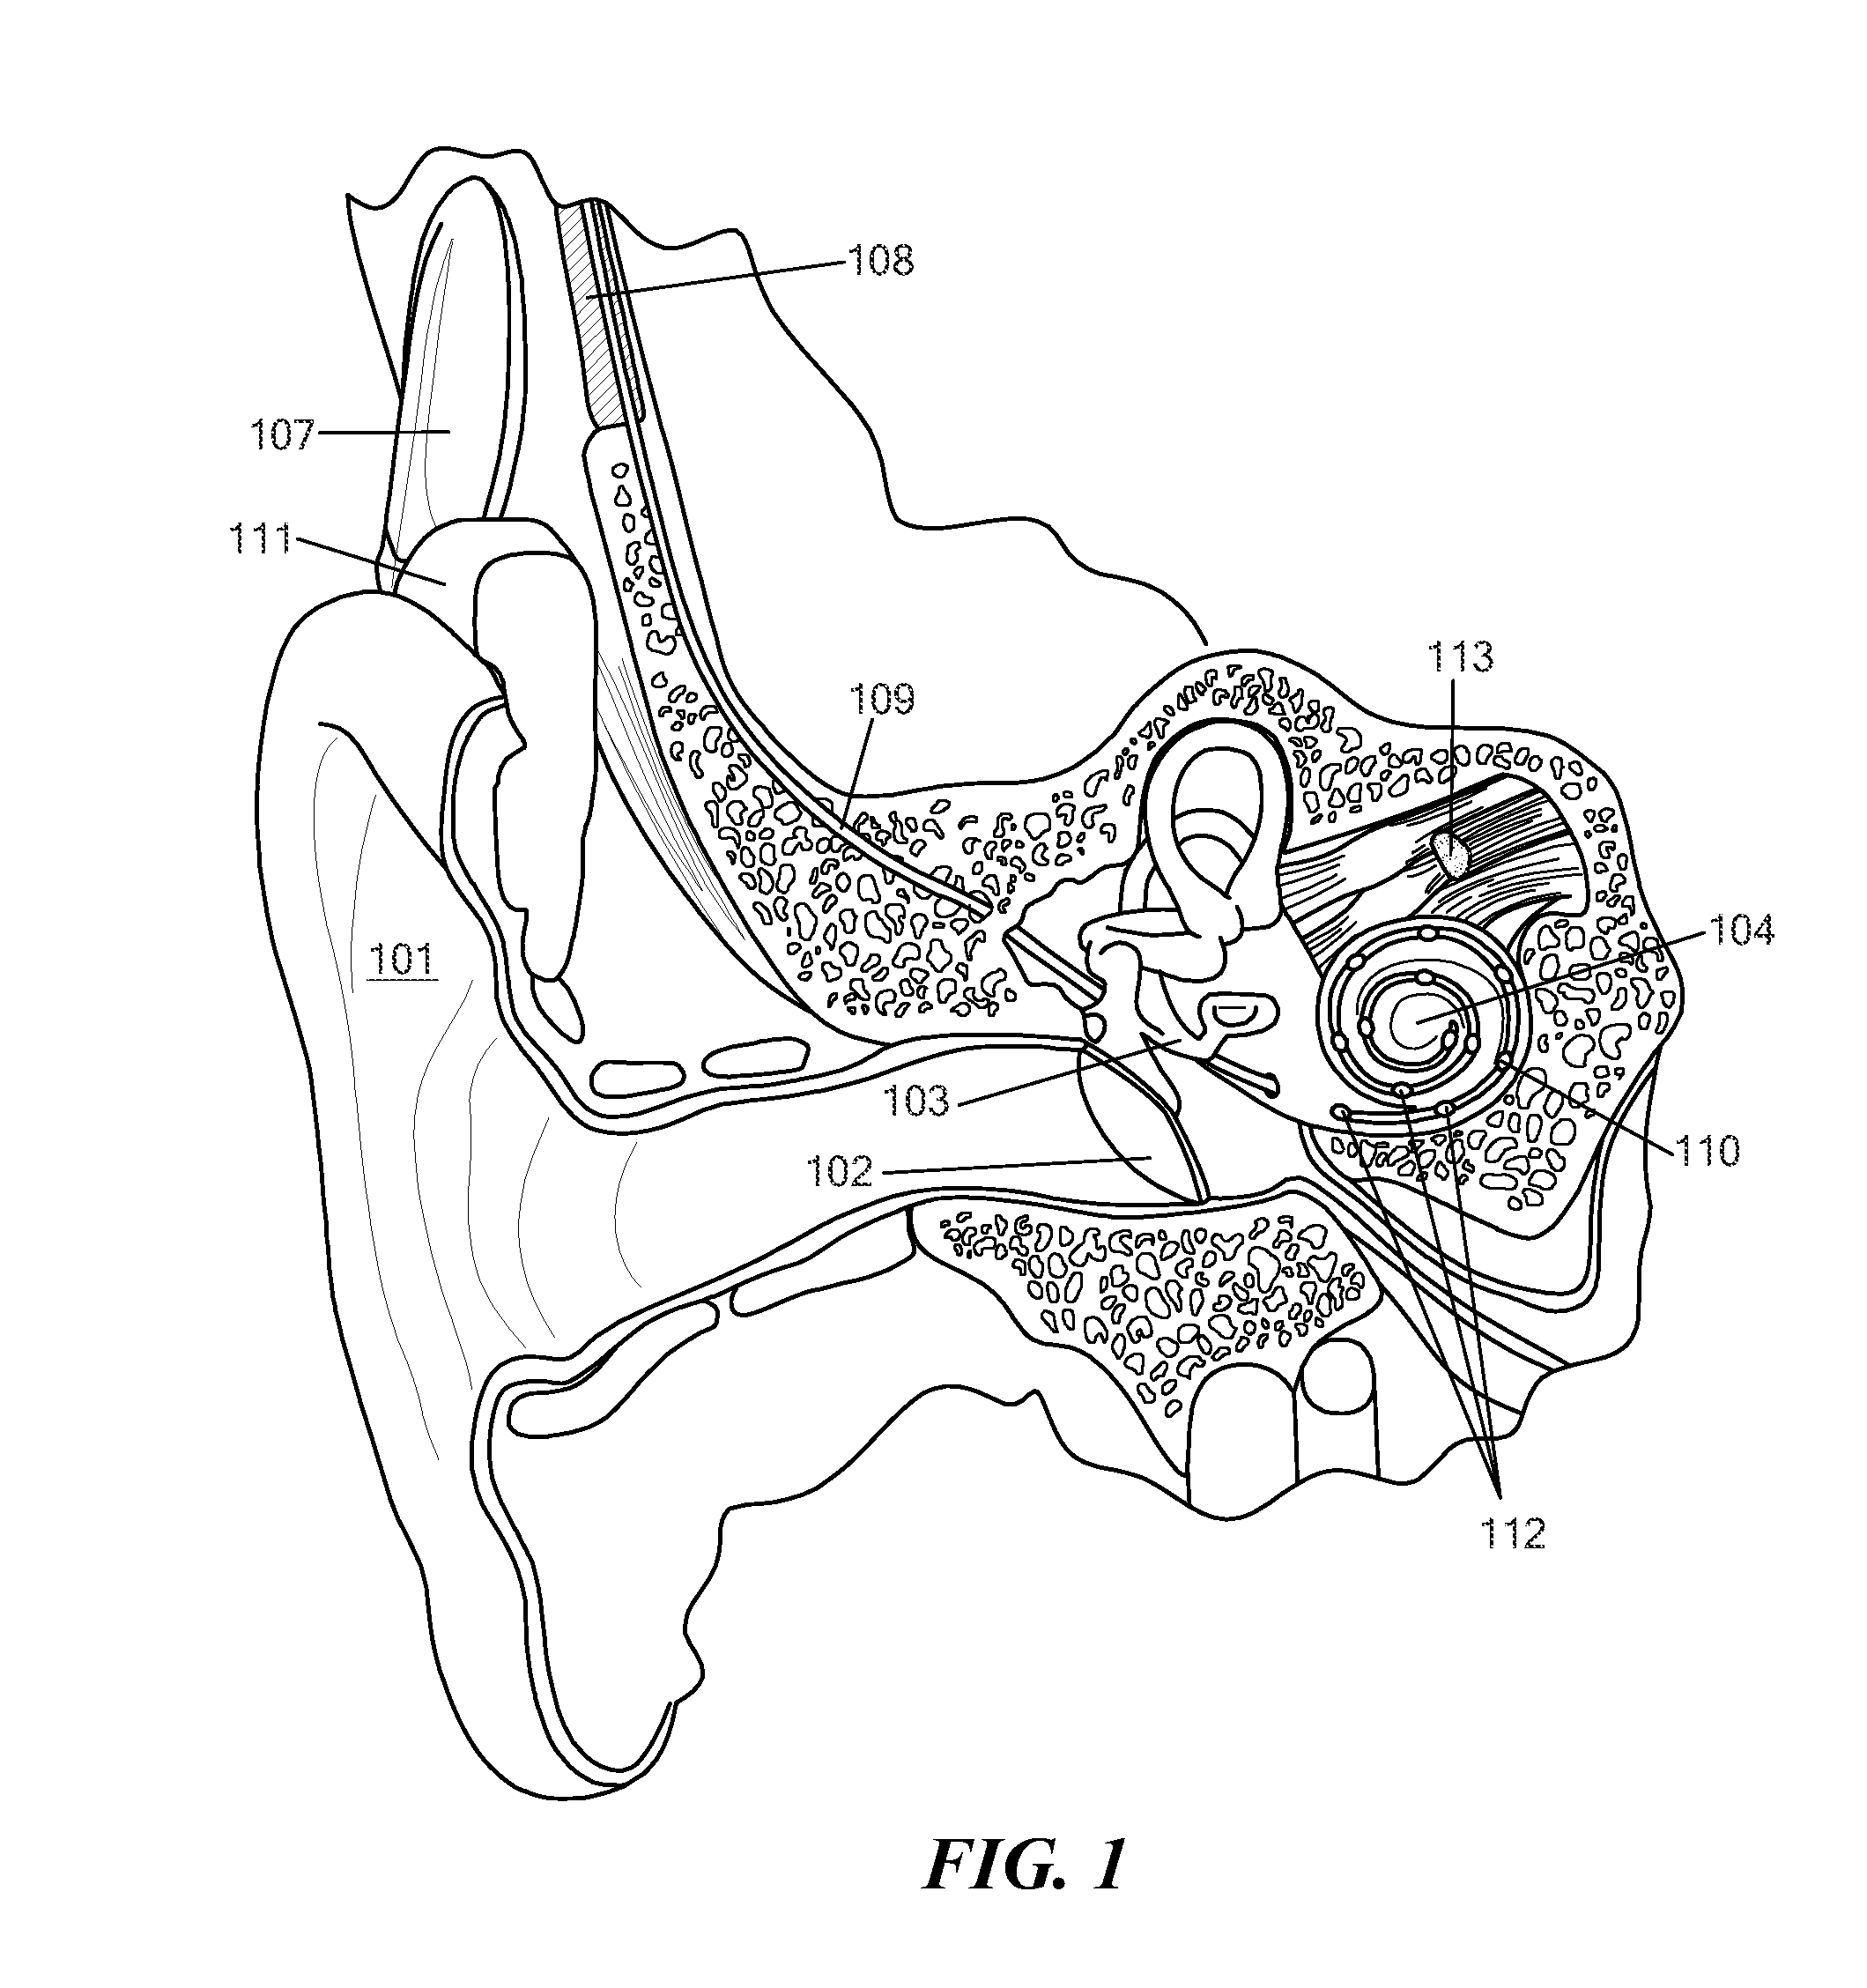 Ear Implant Electrode and Method of Manufacture